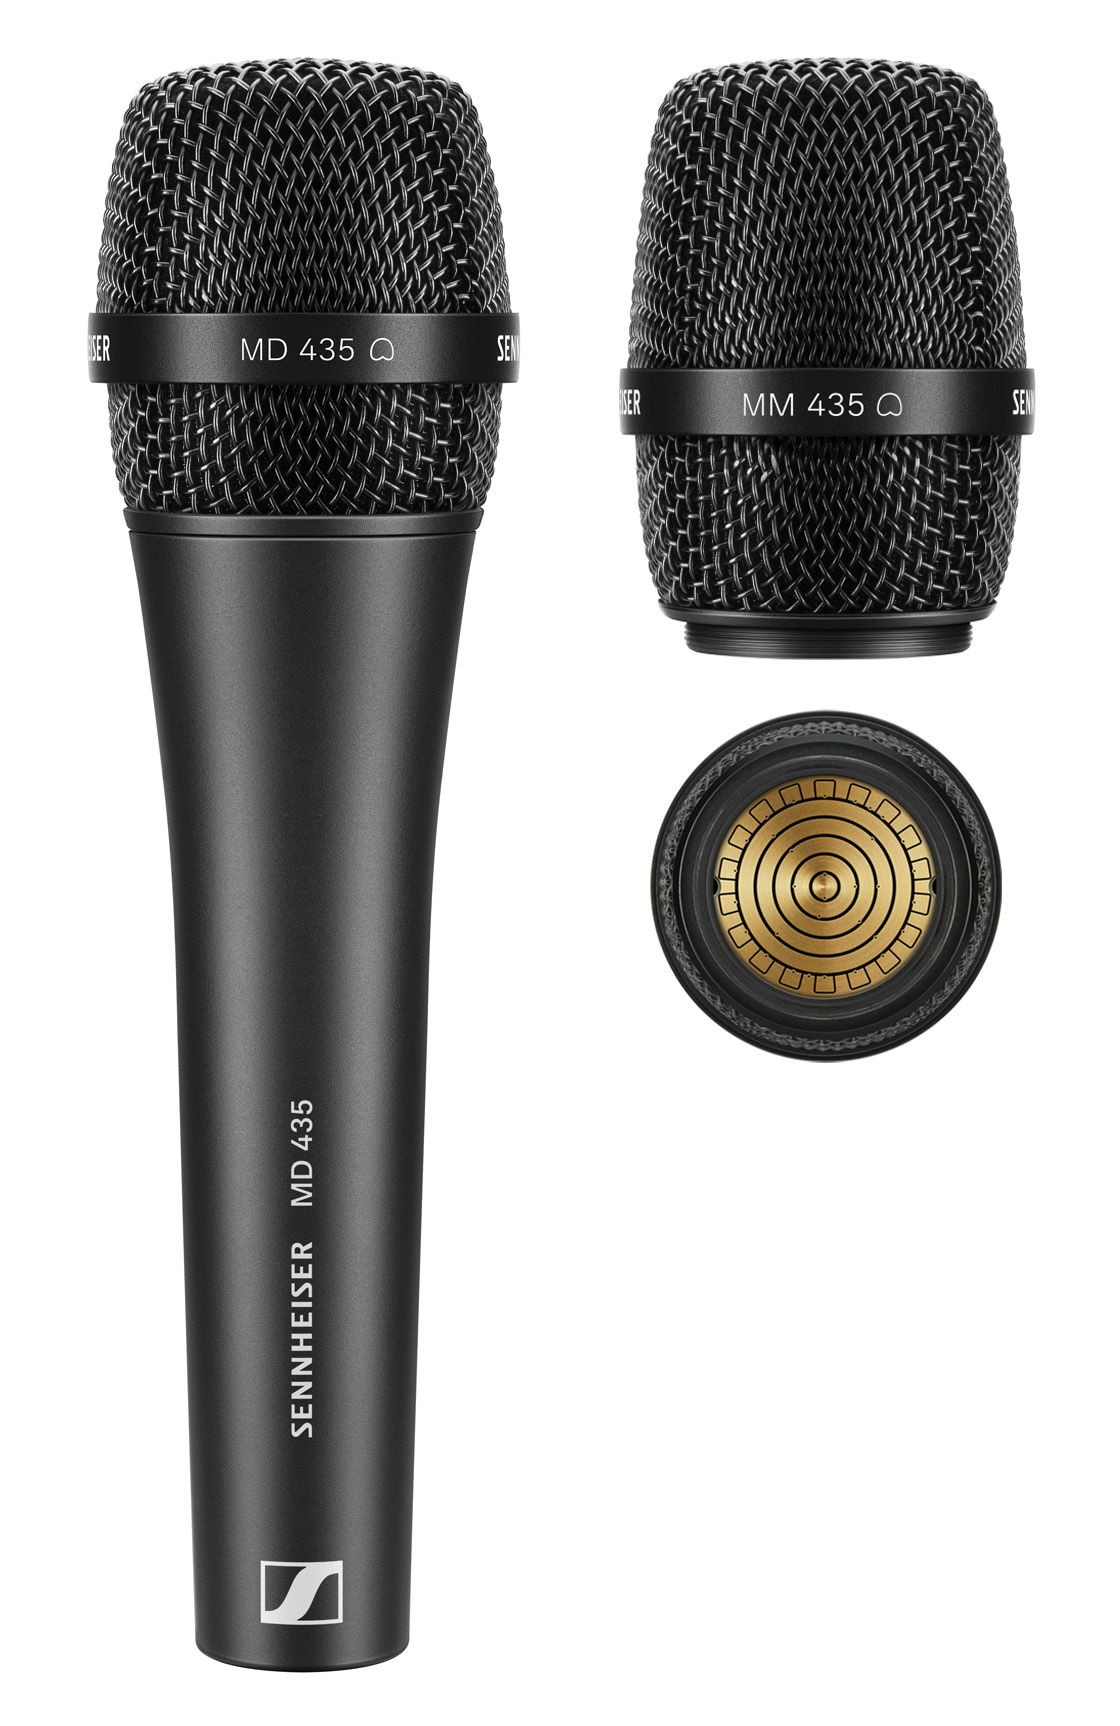 The wired MD 435 cardioid vocal microphone and the MM 435 microphone head (pictured with the capsule interface) for use with Sennheiser wireless transmitters